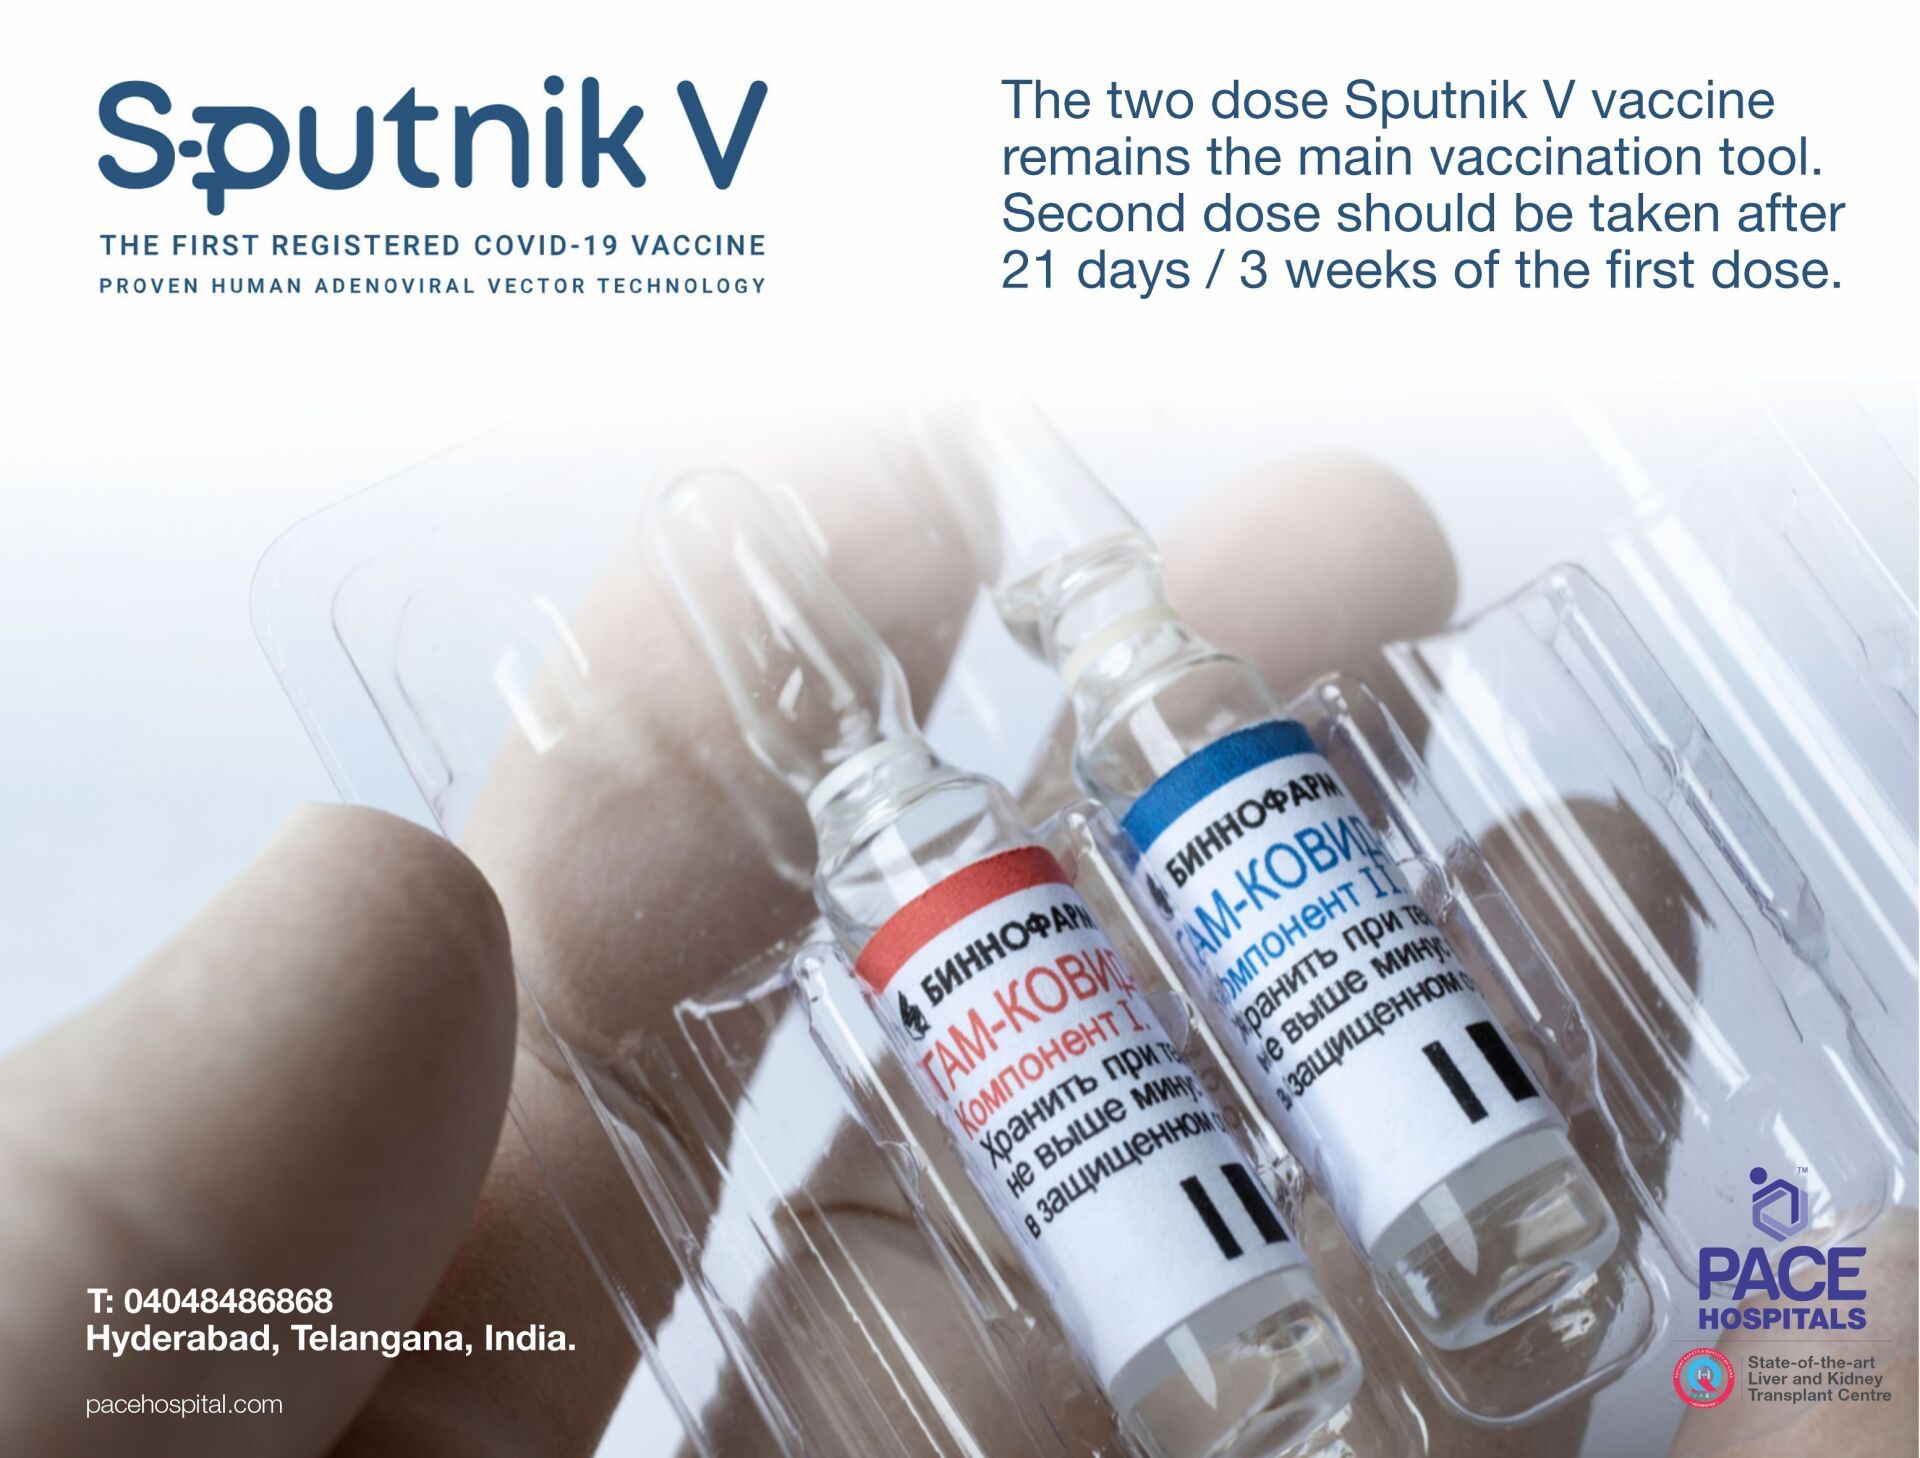 Sputnik V Vaccine doses - 21 days Gap between first and second dose | Gam-COVID-Vac